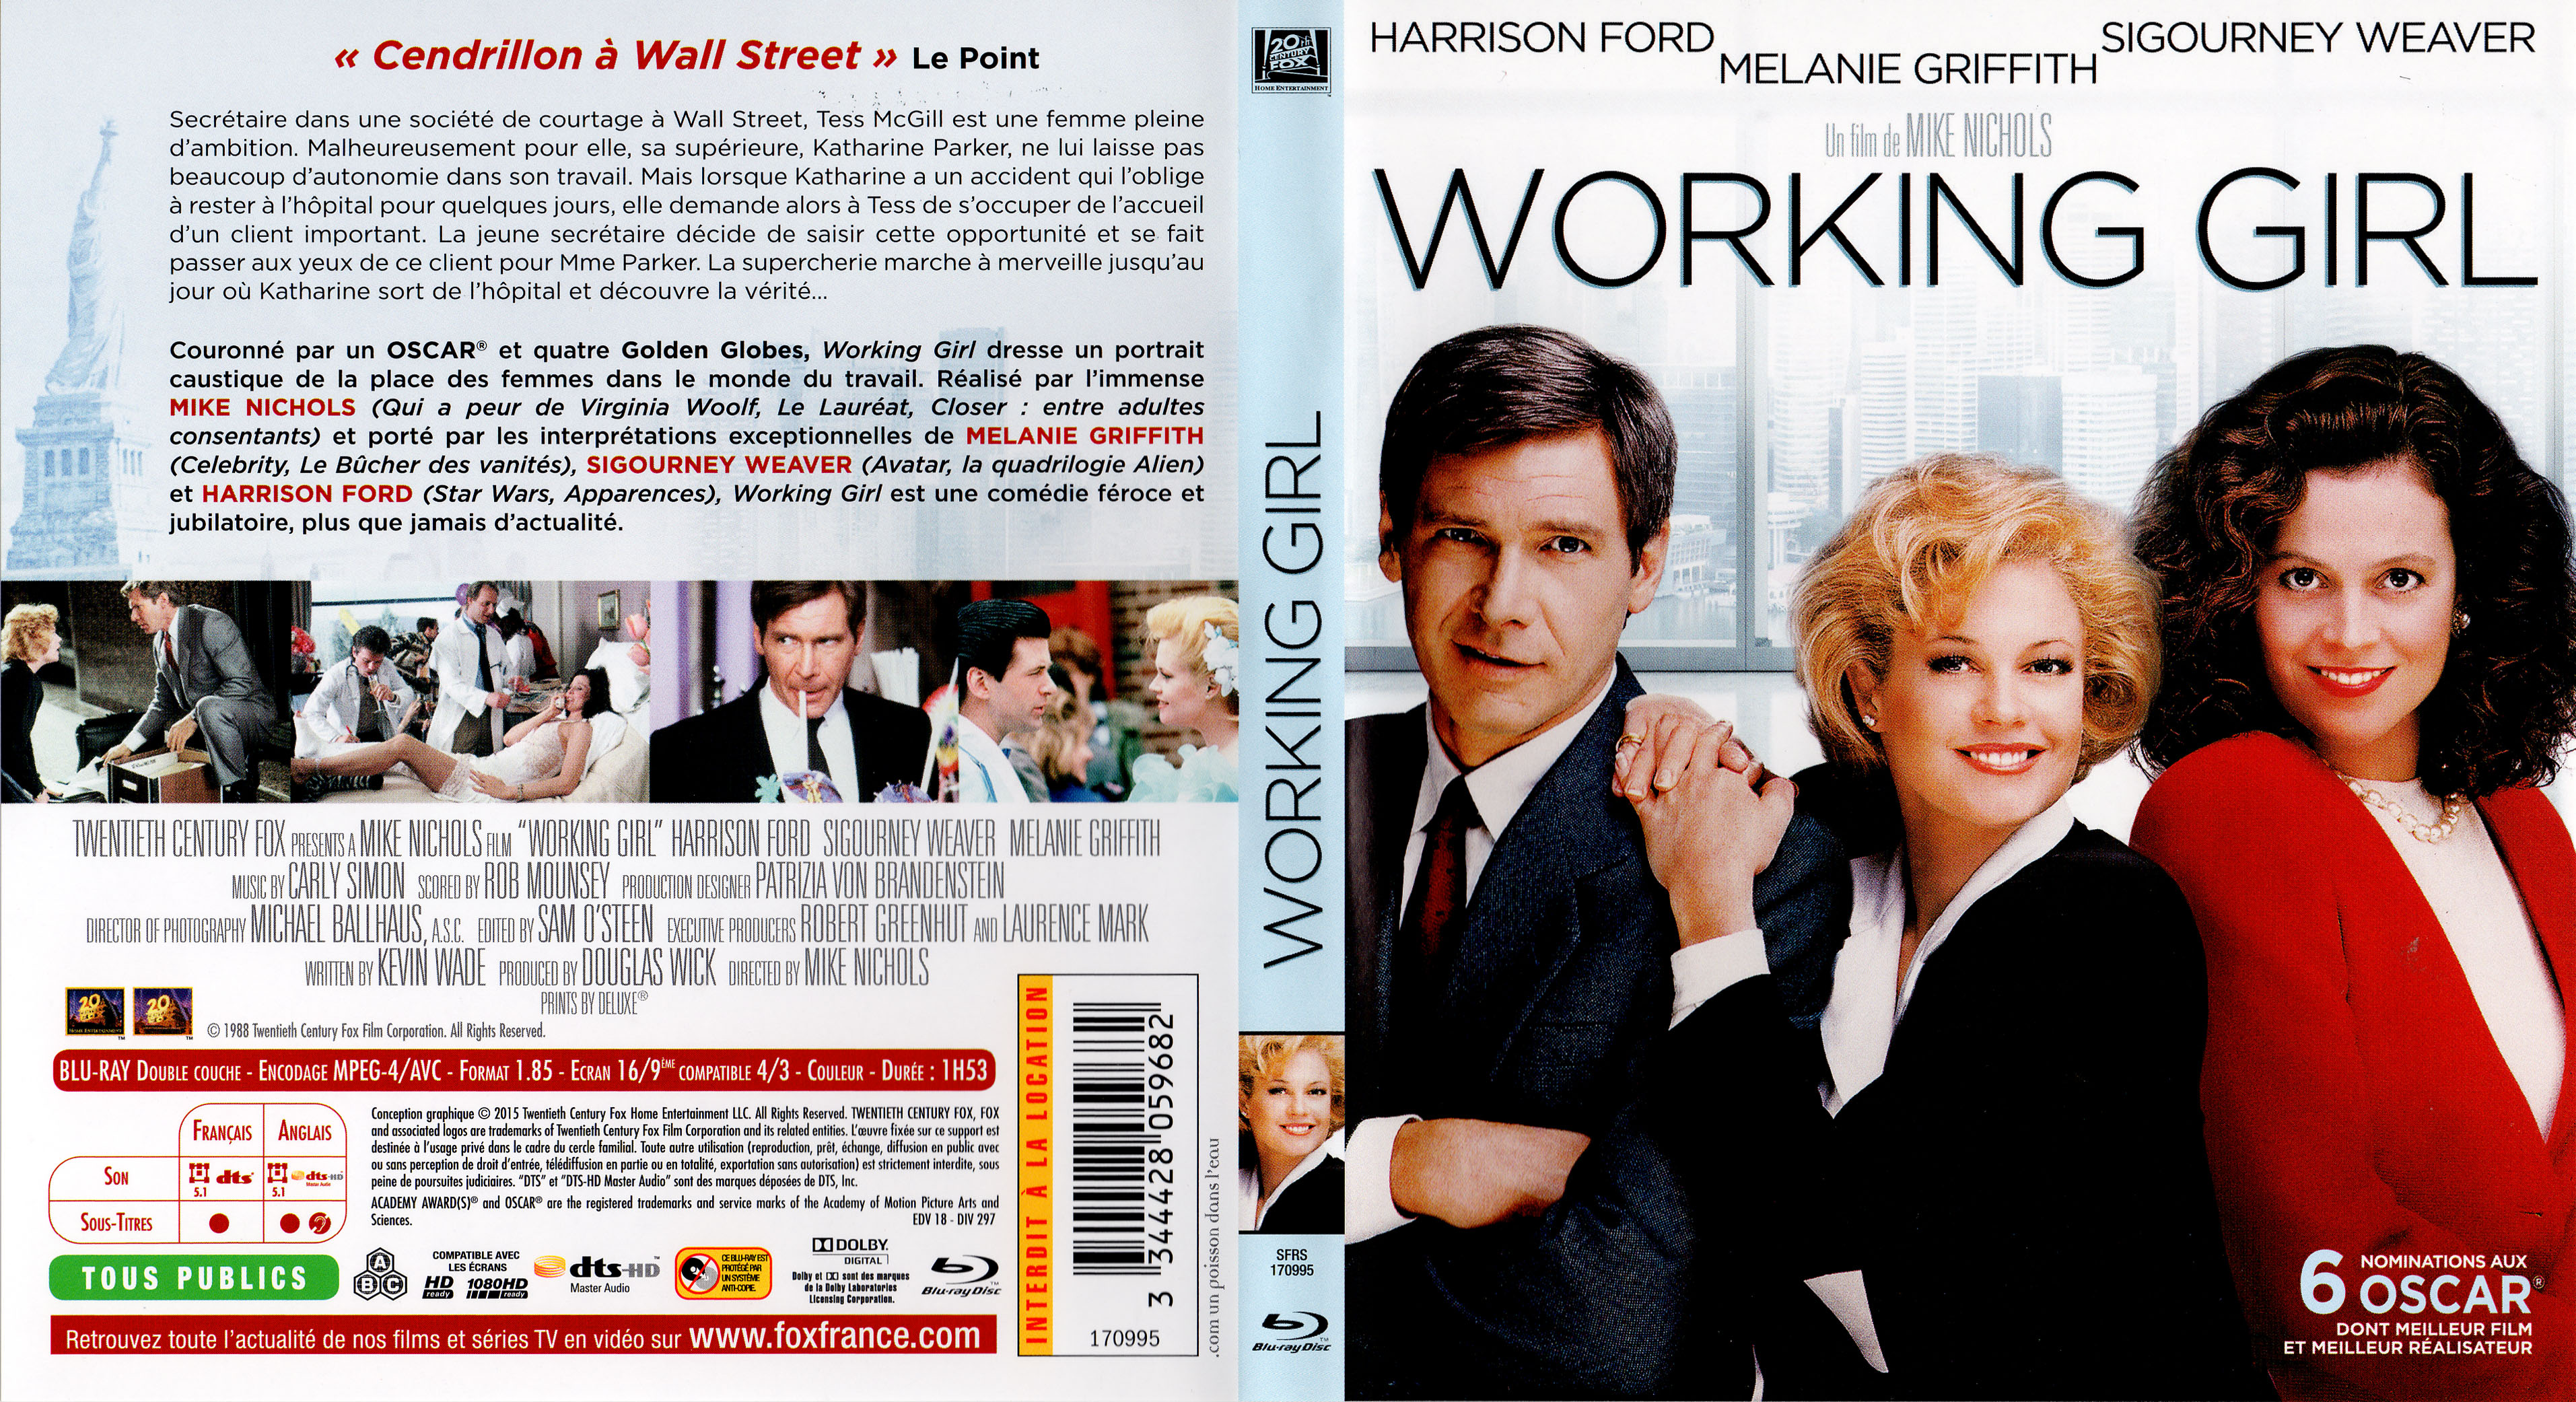 Jaquette DVD Working girl (BLU-RAY)